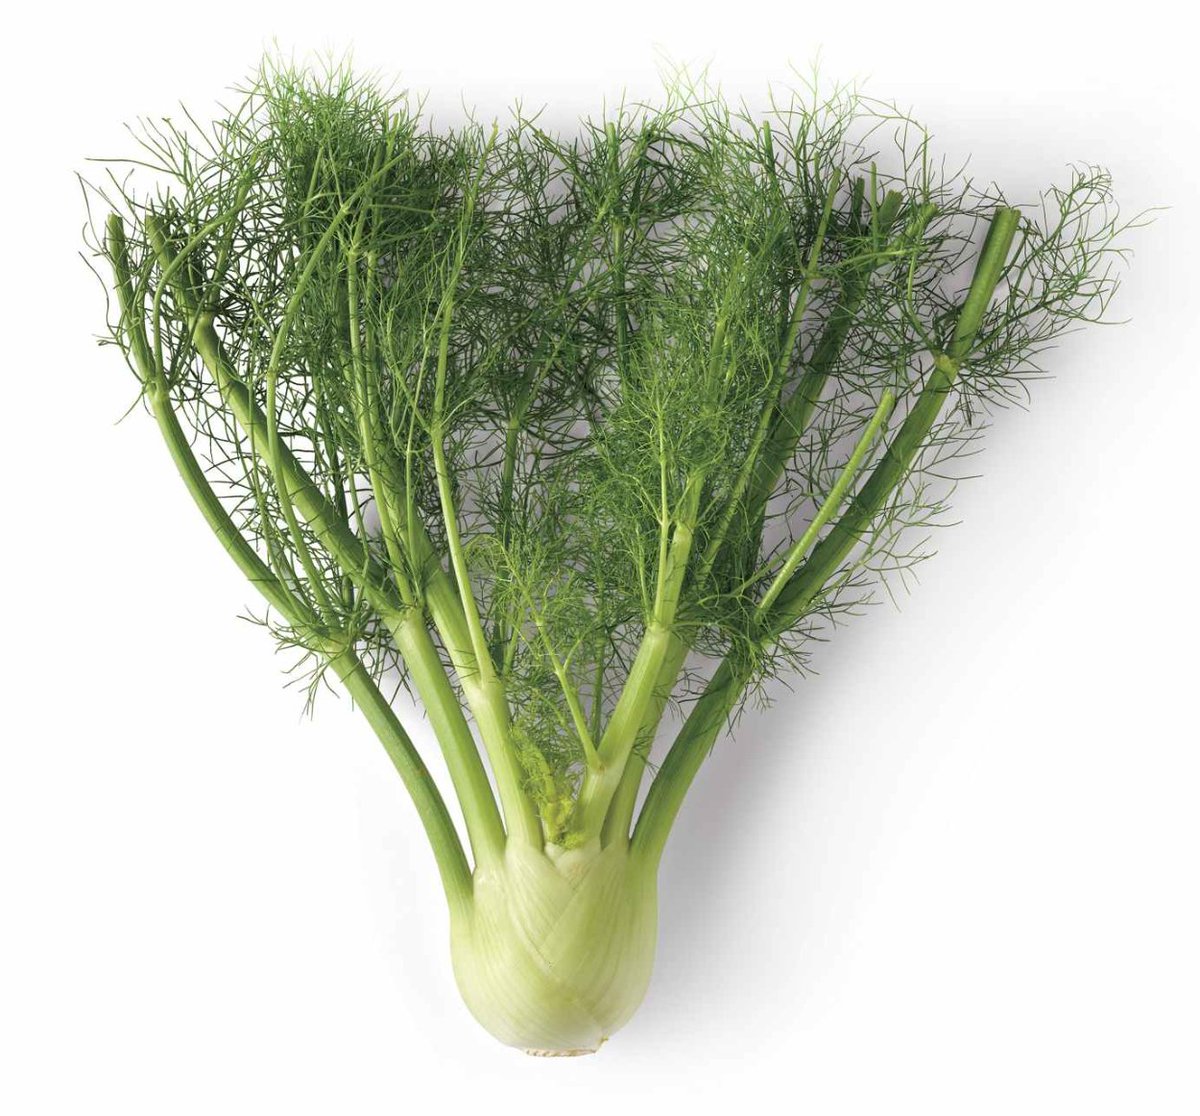 If you experience painful menstruation, fennel is your friend. This herb reduces the presence of menstrual pain-inducing prostaglandins in the blood. Drinking fresh fennel juice before & during menstruation helps alleviate cramps, bloating, & other uncomfortable period symptoms.